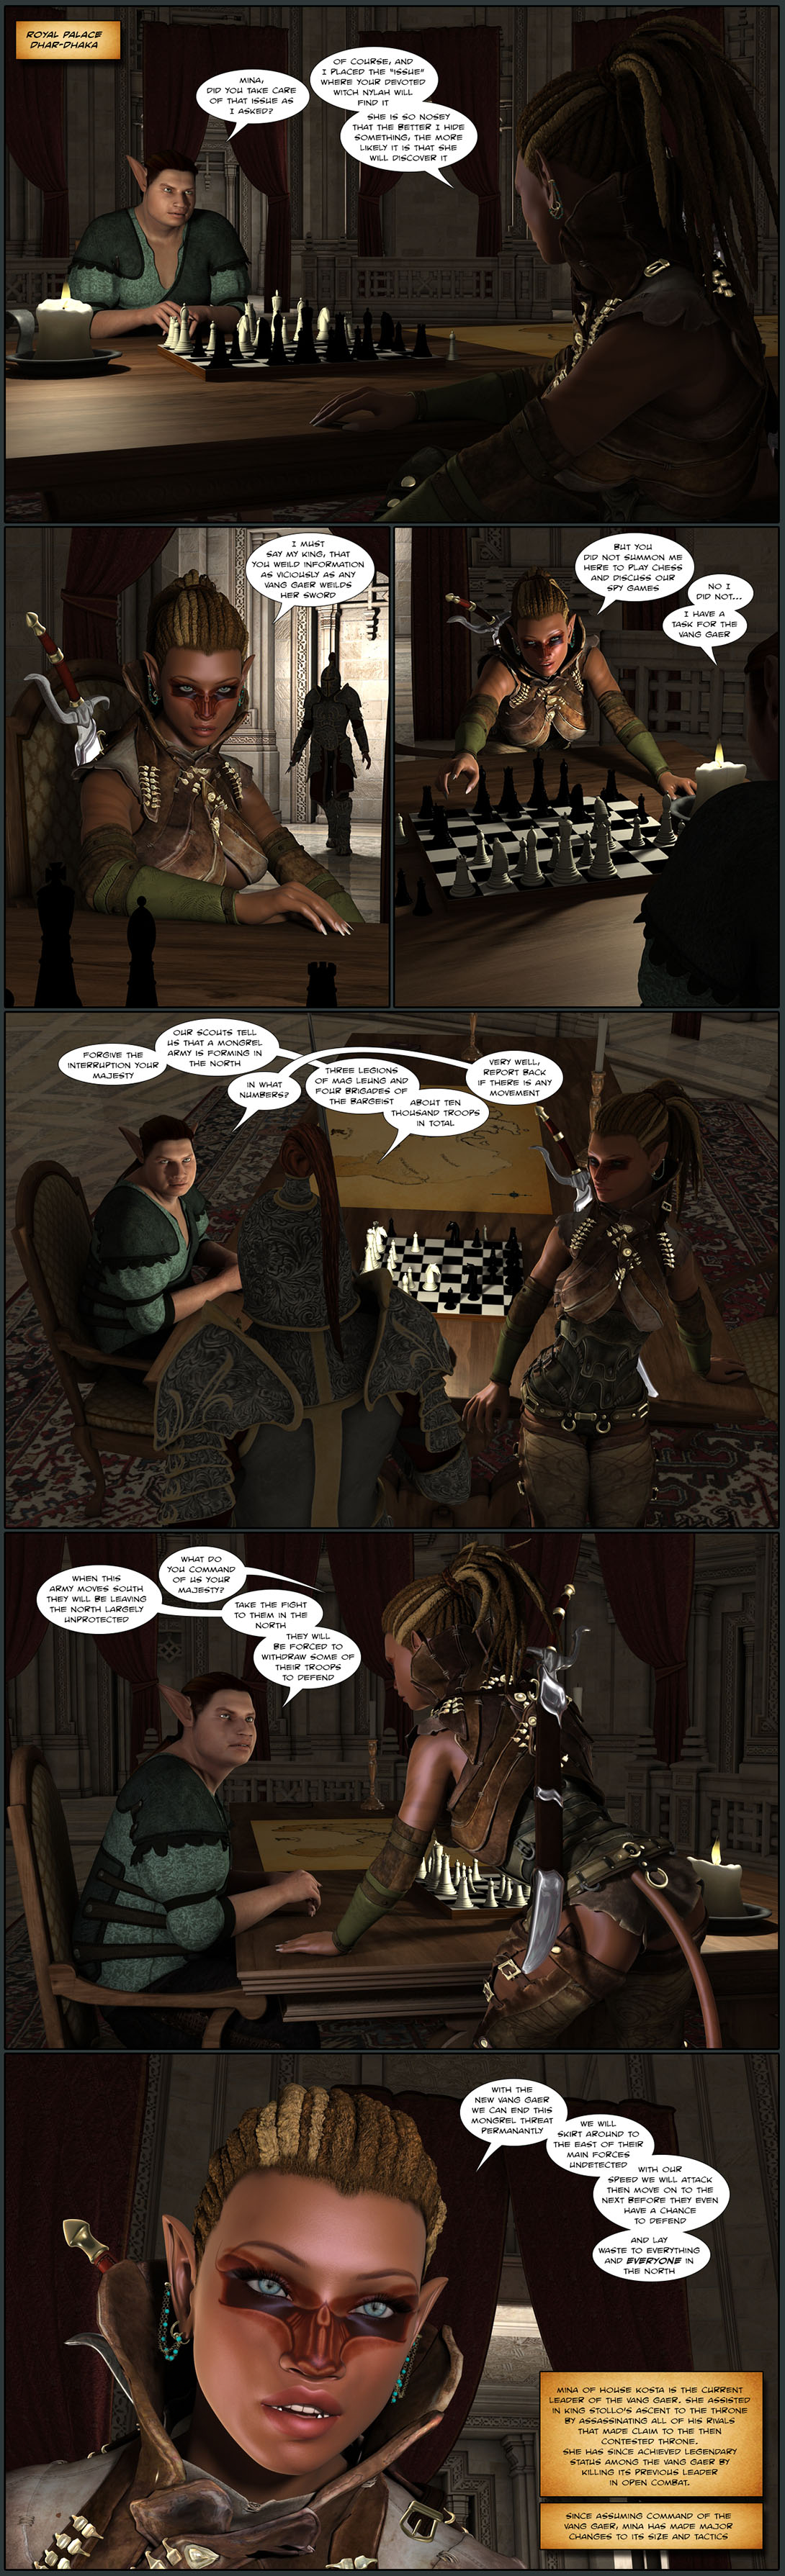 Page 304